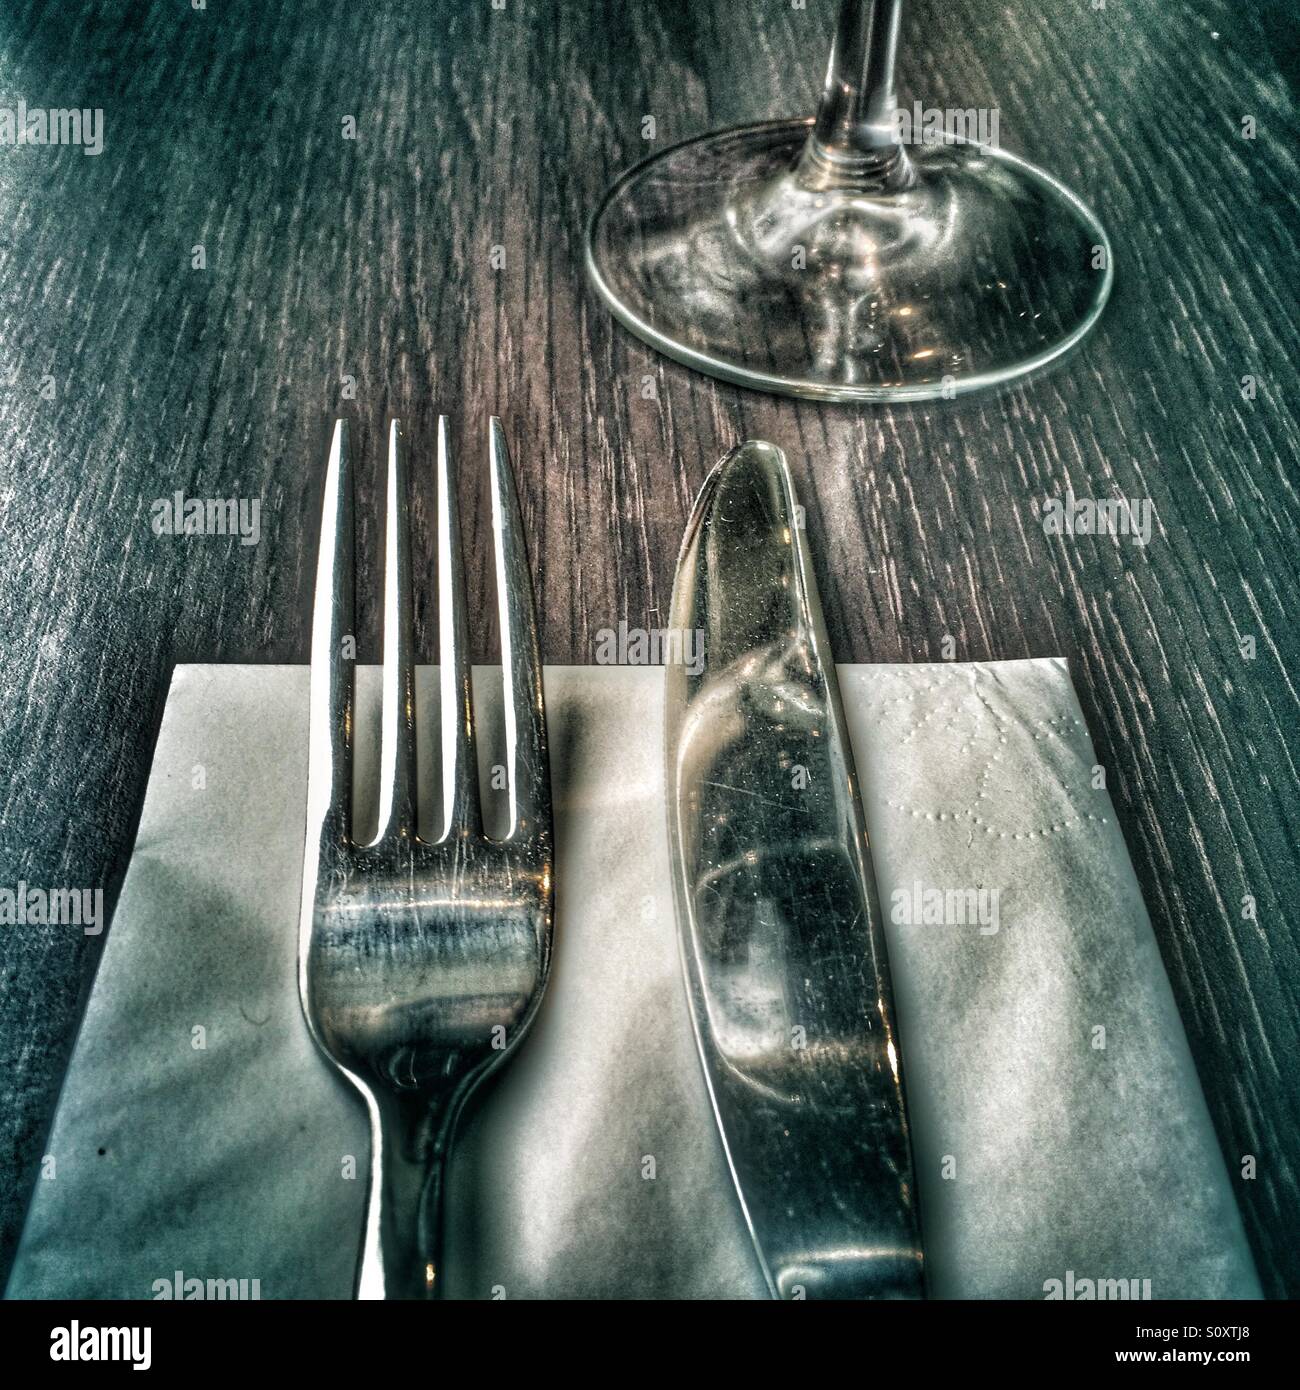 Knife, fork, serviette and glass Stock Photo